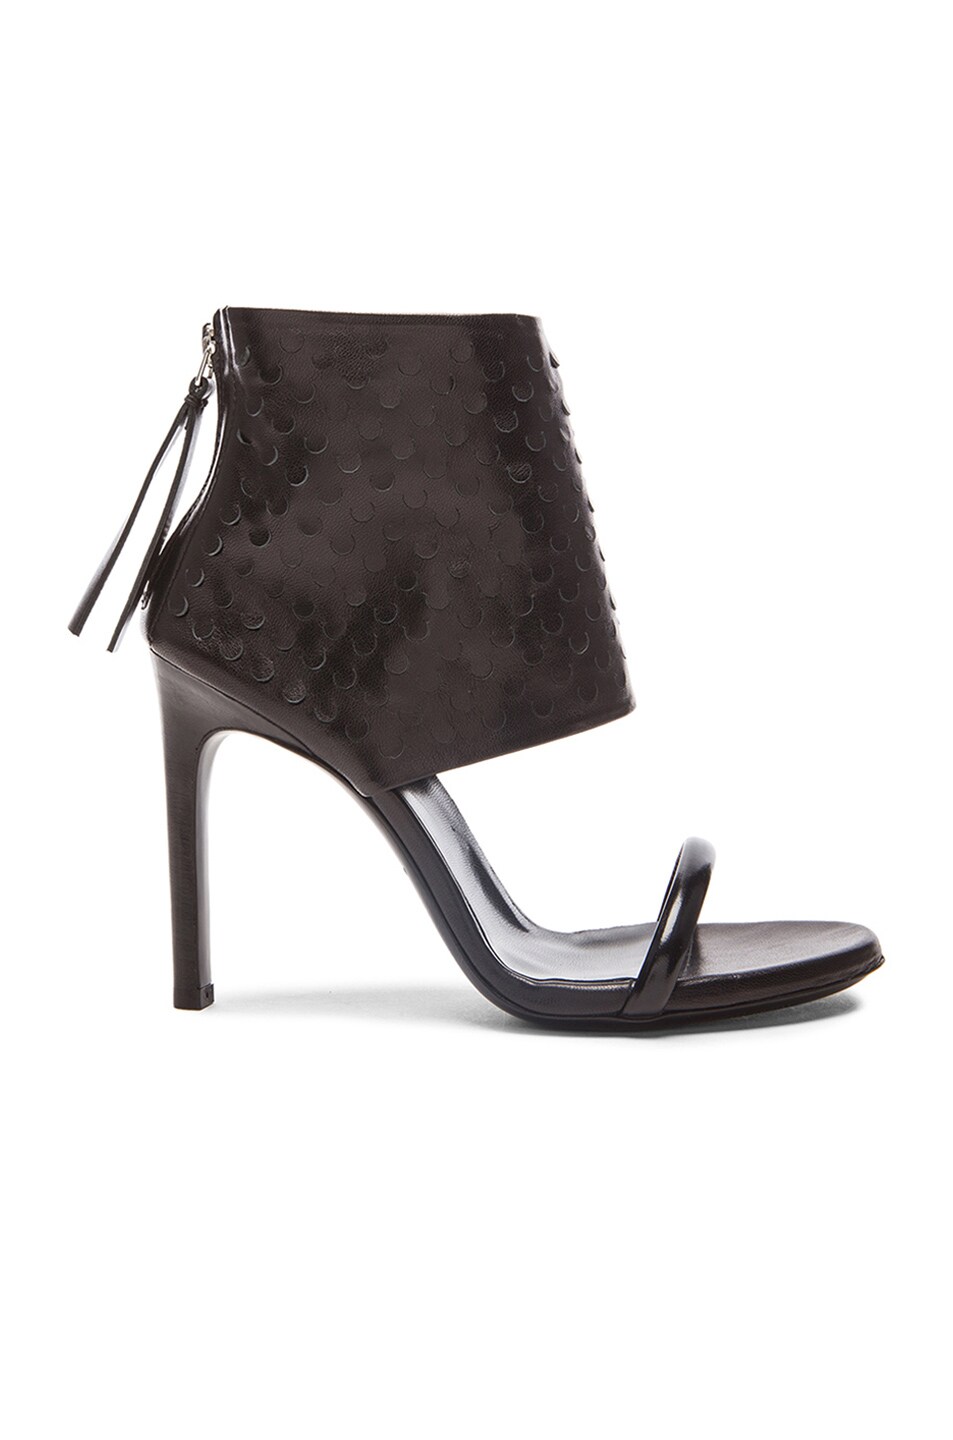 Image 1 of McQ Alexander McQueen Cleo Leather Sock Sandals in Black